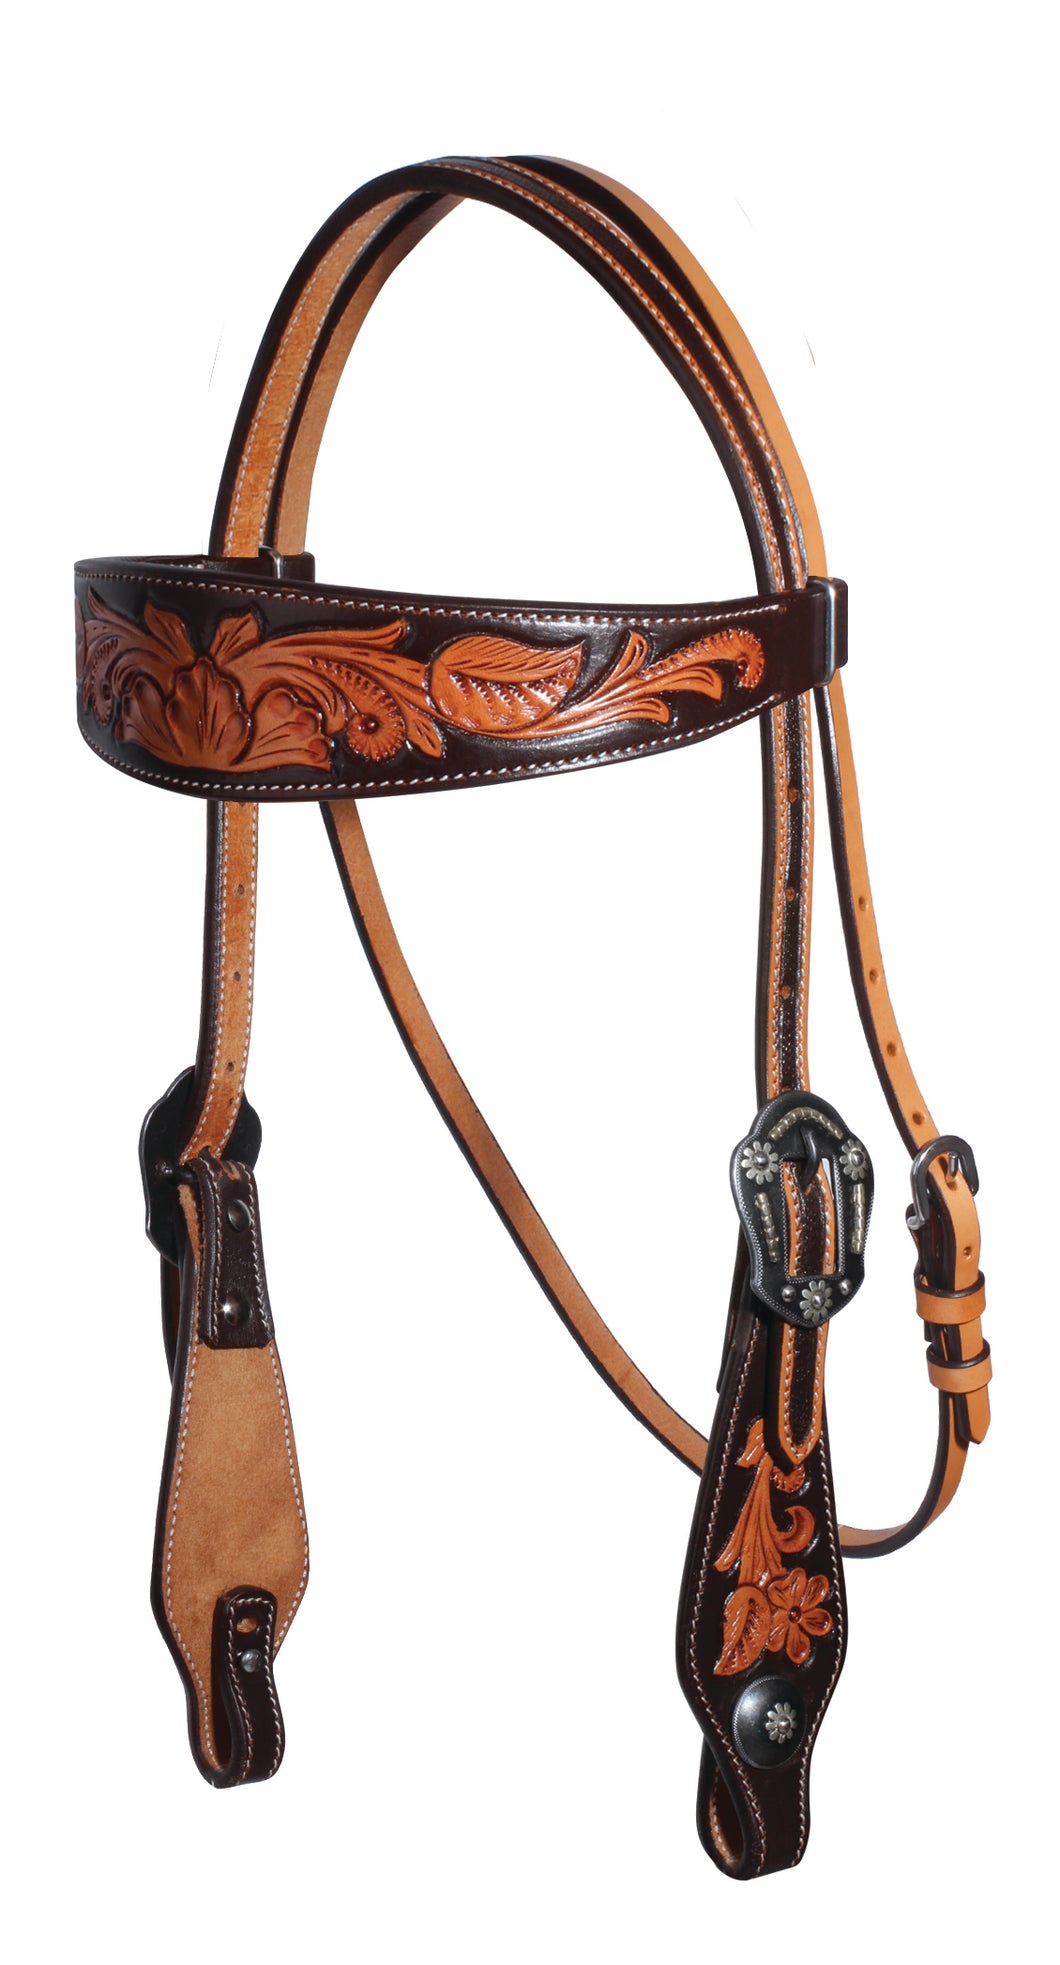 Pard's Western Shop Professional's Choice Chocolate Floral Browband Headstall